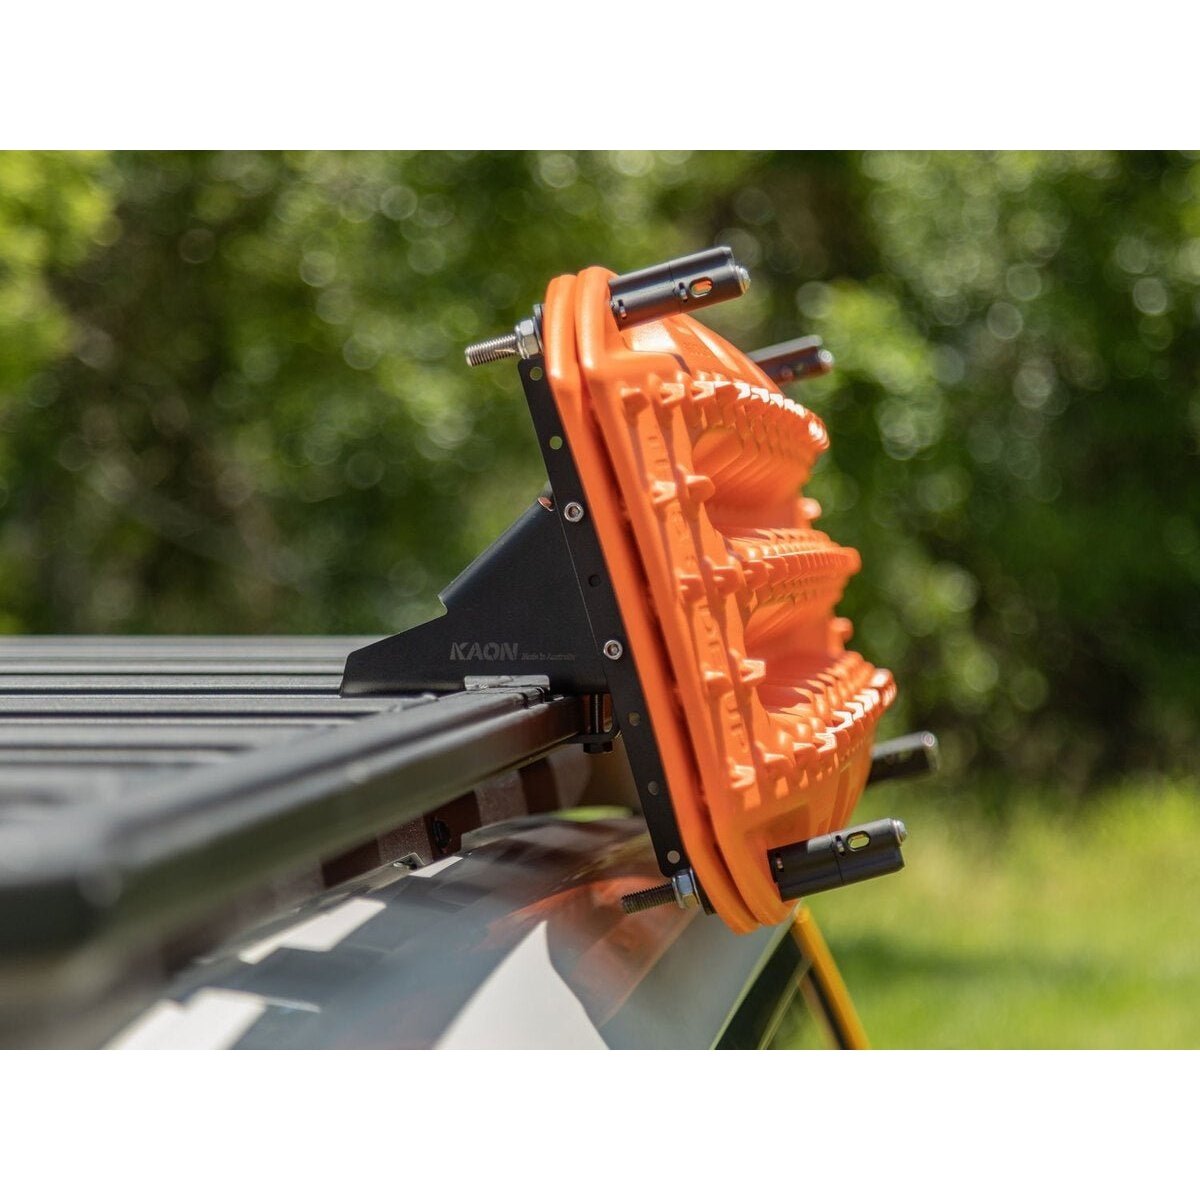 Side Angled Fixed Maxtrax Mount to suit ARB BASE Rack - AMD Touring